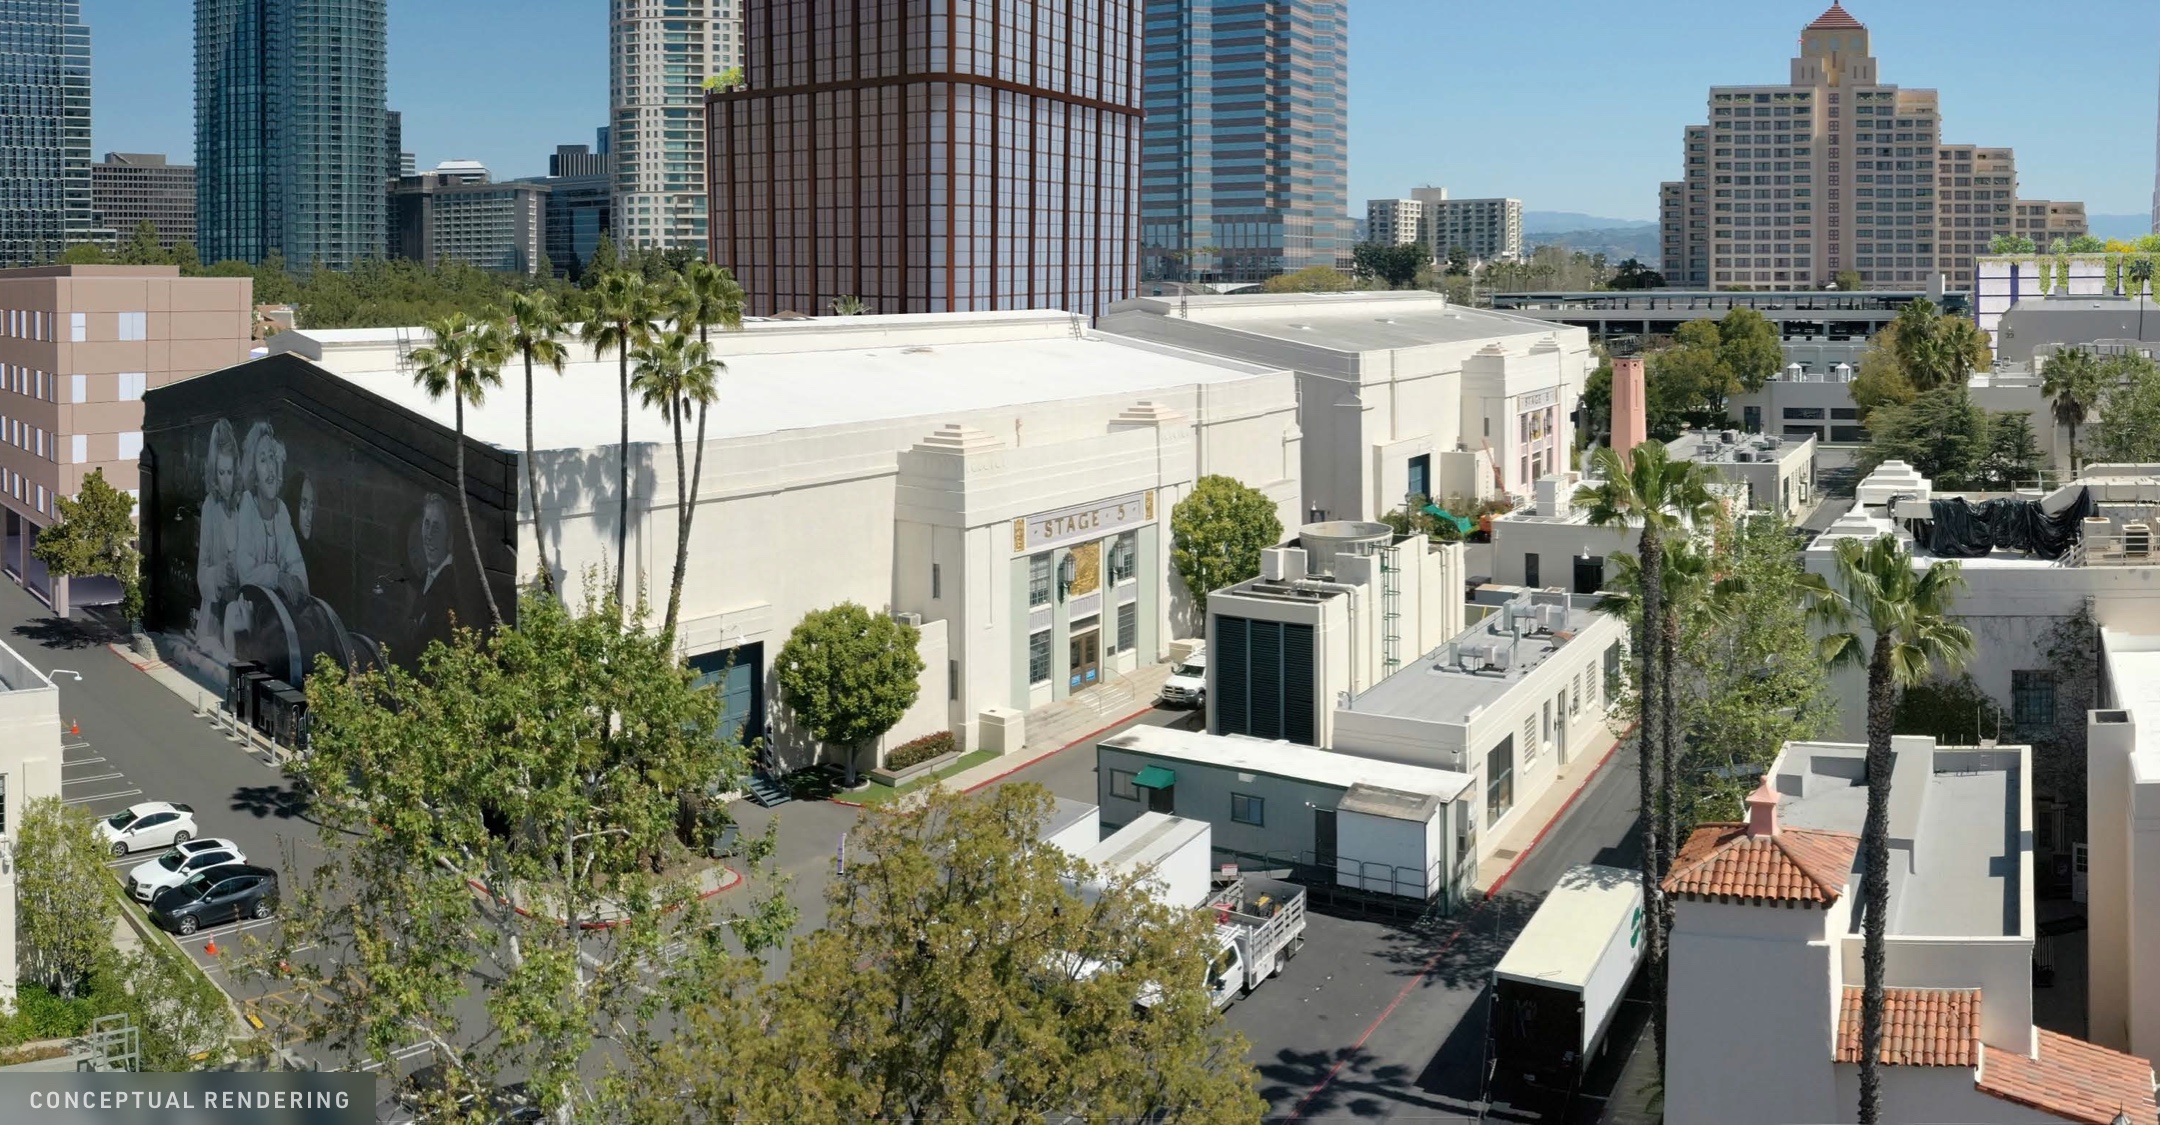 Preserving the lot’s historic district while providing new LEED-Platinum office space.